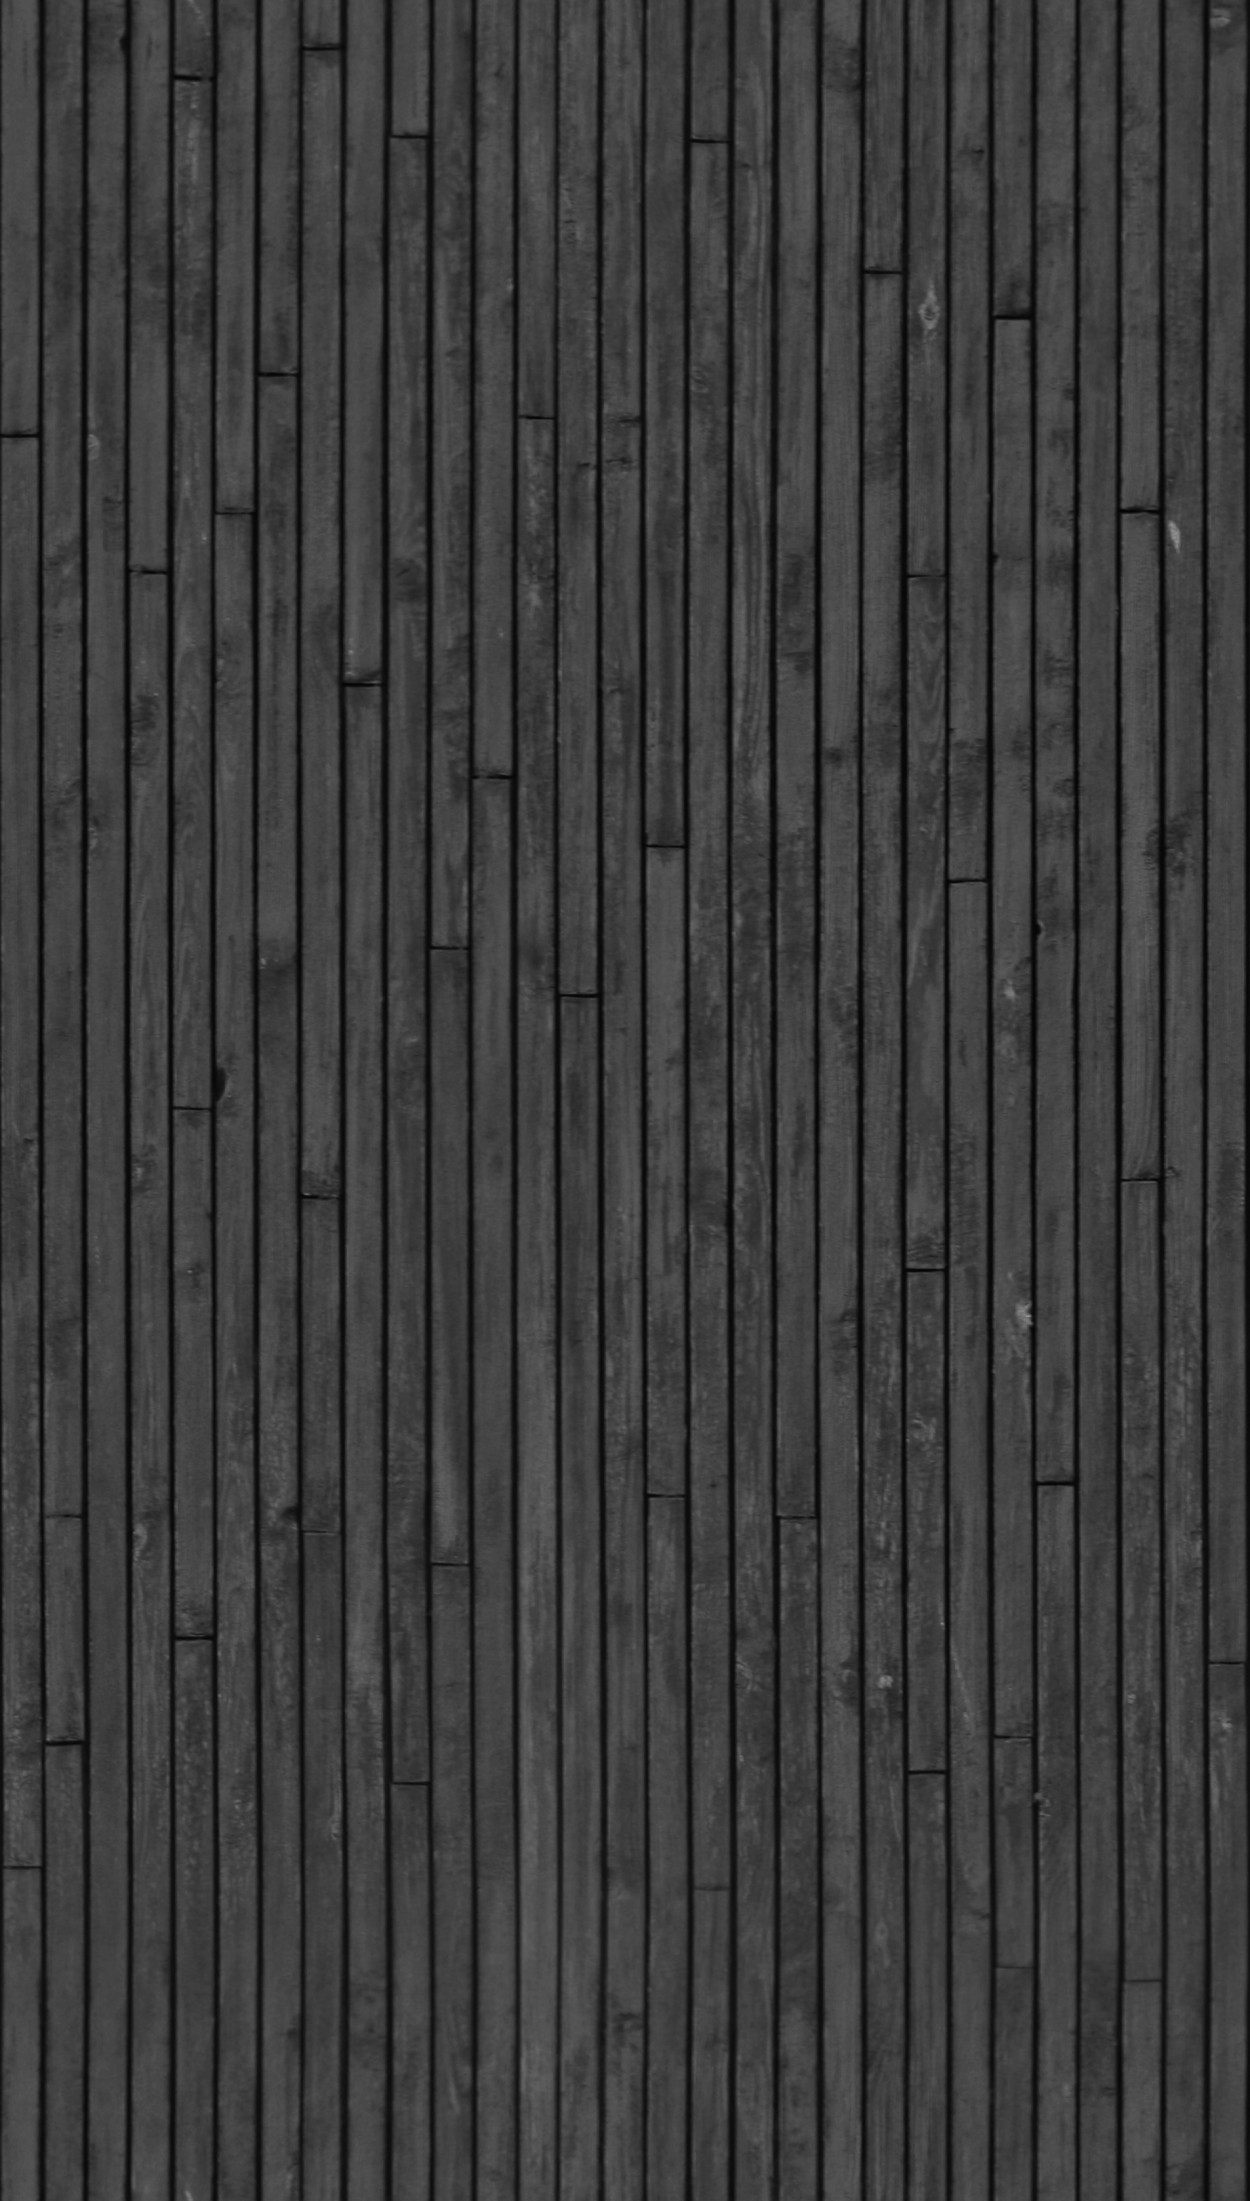 A seamless charred timber texture for use in architectural drawings and 3D models